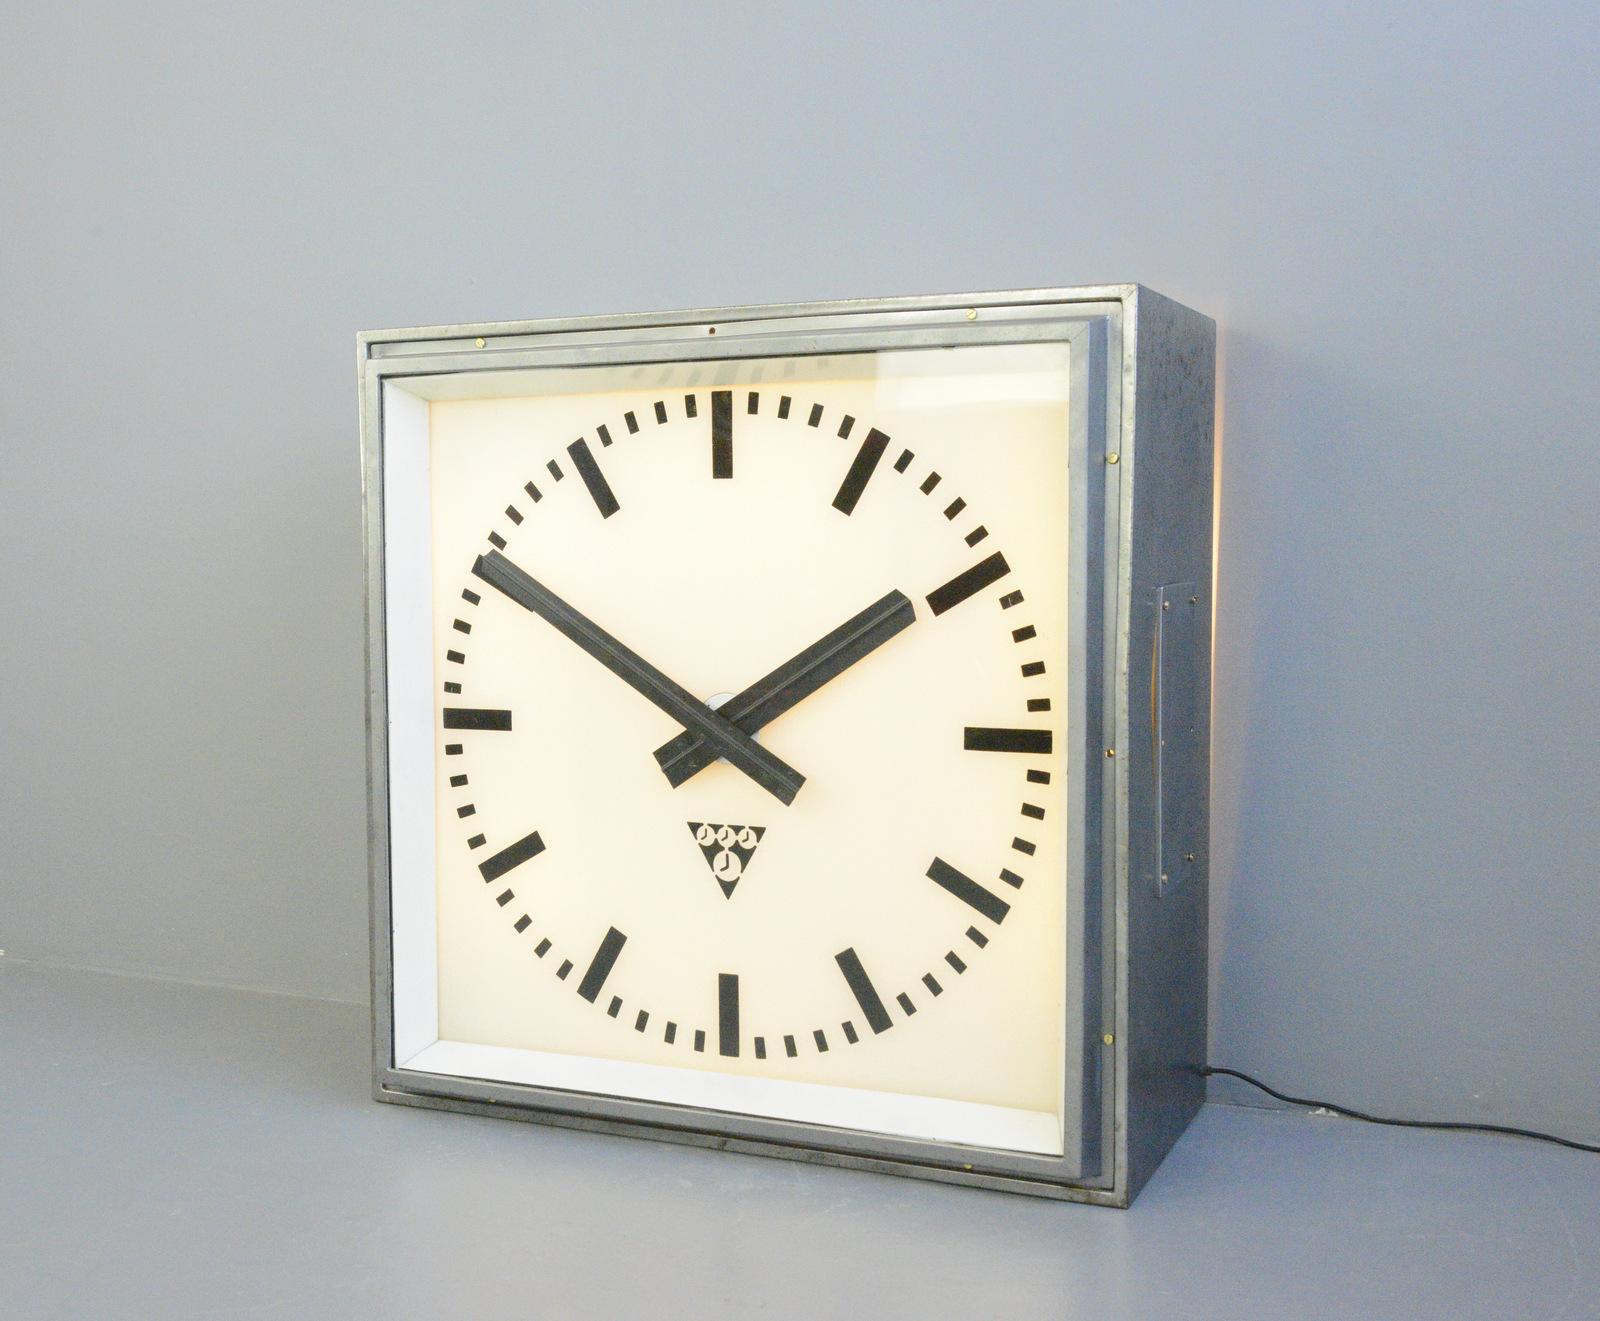 XL light up station clock by Pragotron circa 1950s

- Steel casing
- Glass face and dial
- Original hands
- Can be wall mounted or floor standing
- Takes 6x E27 fitting bulbs
- The lights are remote controlled
- Made by Pragotron
- Czech ~